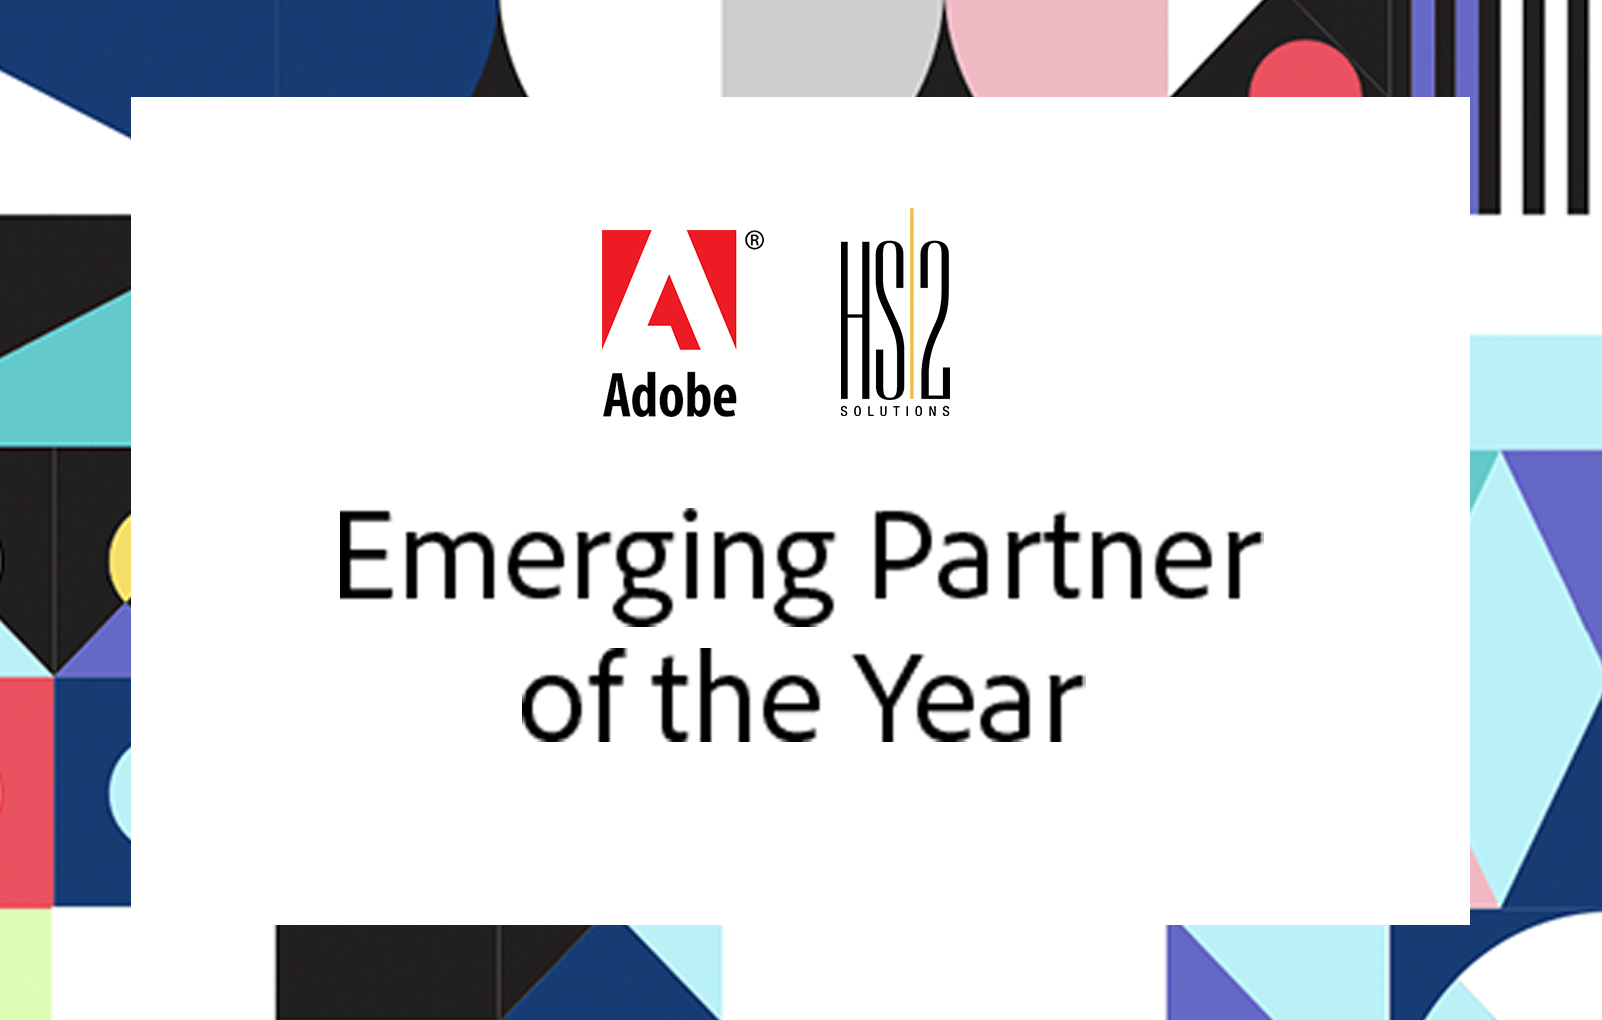 Press Release: HS2 Solutions Receives Adobe Emerging Partner of the Year Award at Adobe Summit